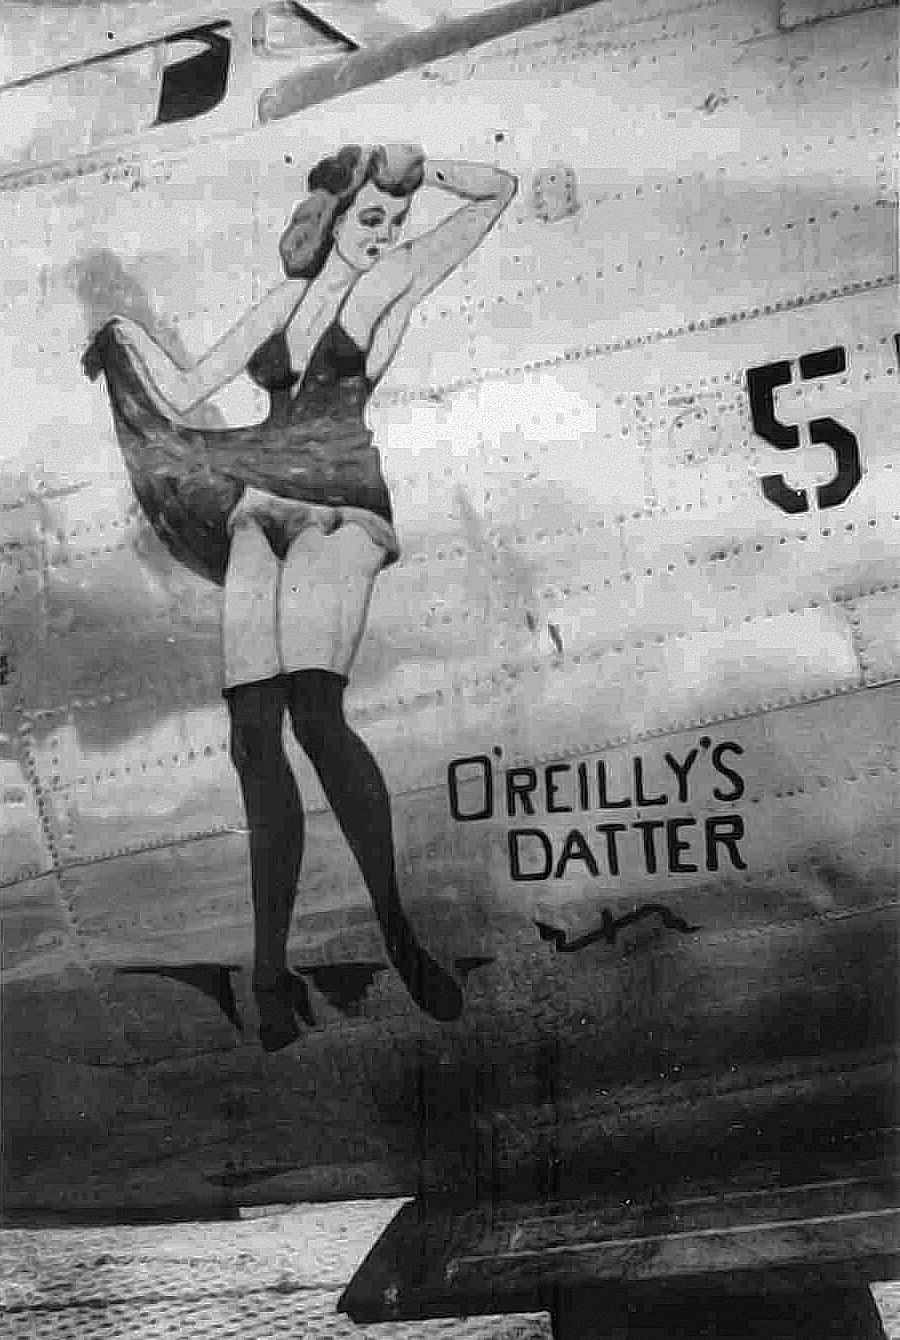 O'Reilly's Datter